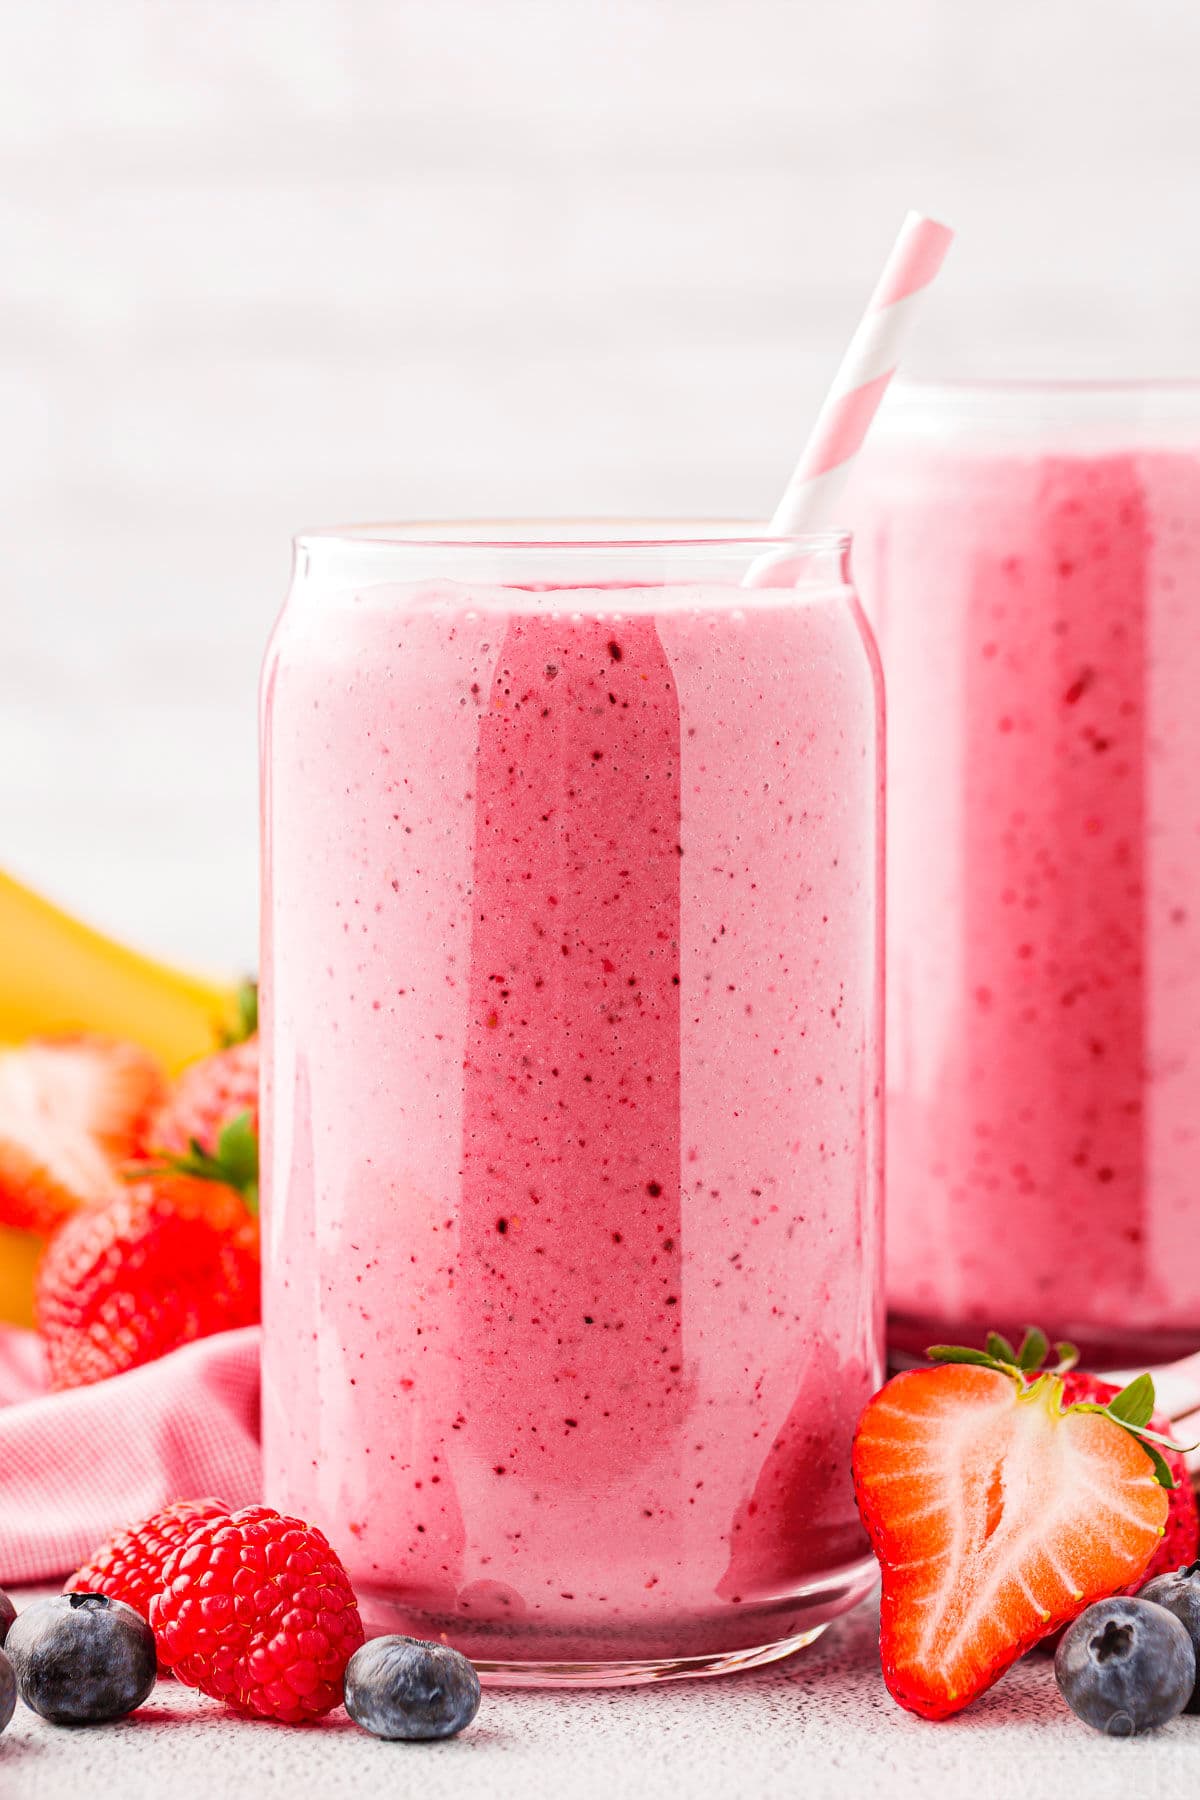 head on shot of two glasses with bright pink smoothies and scattered berries around the base of the glasses.